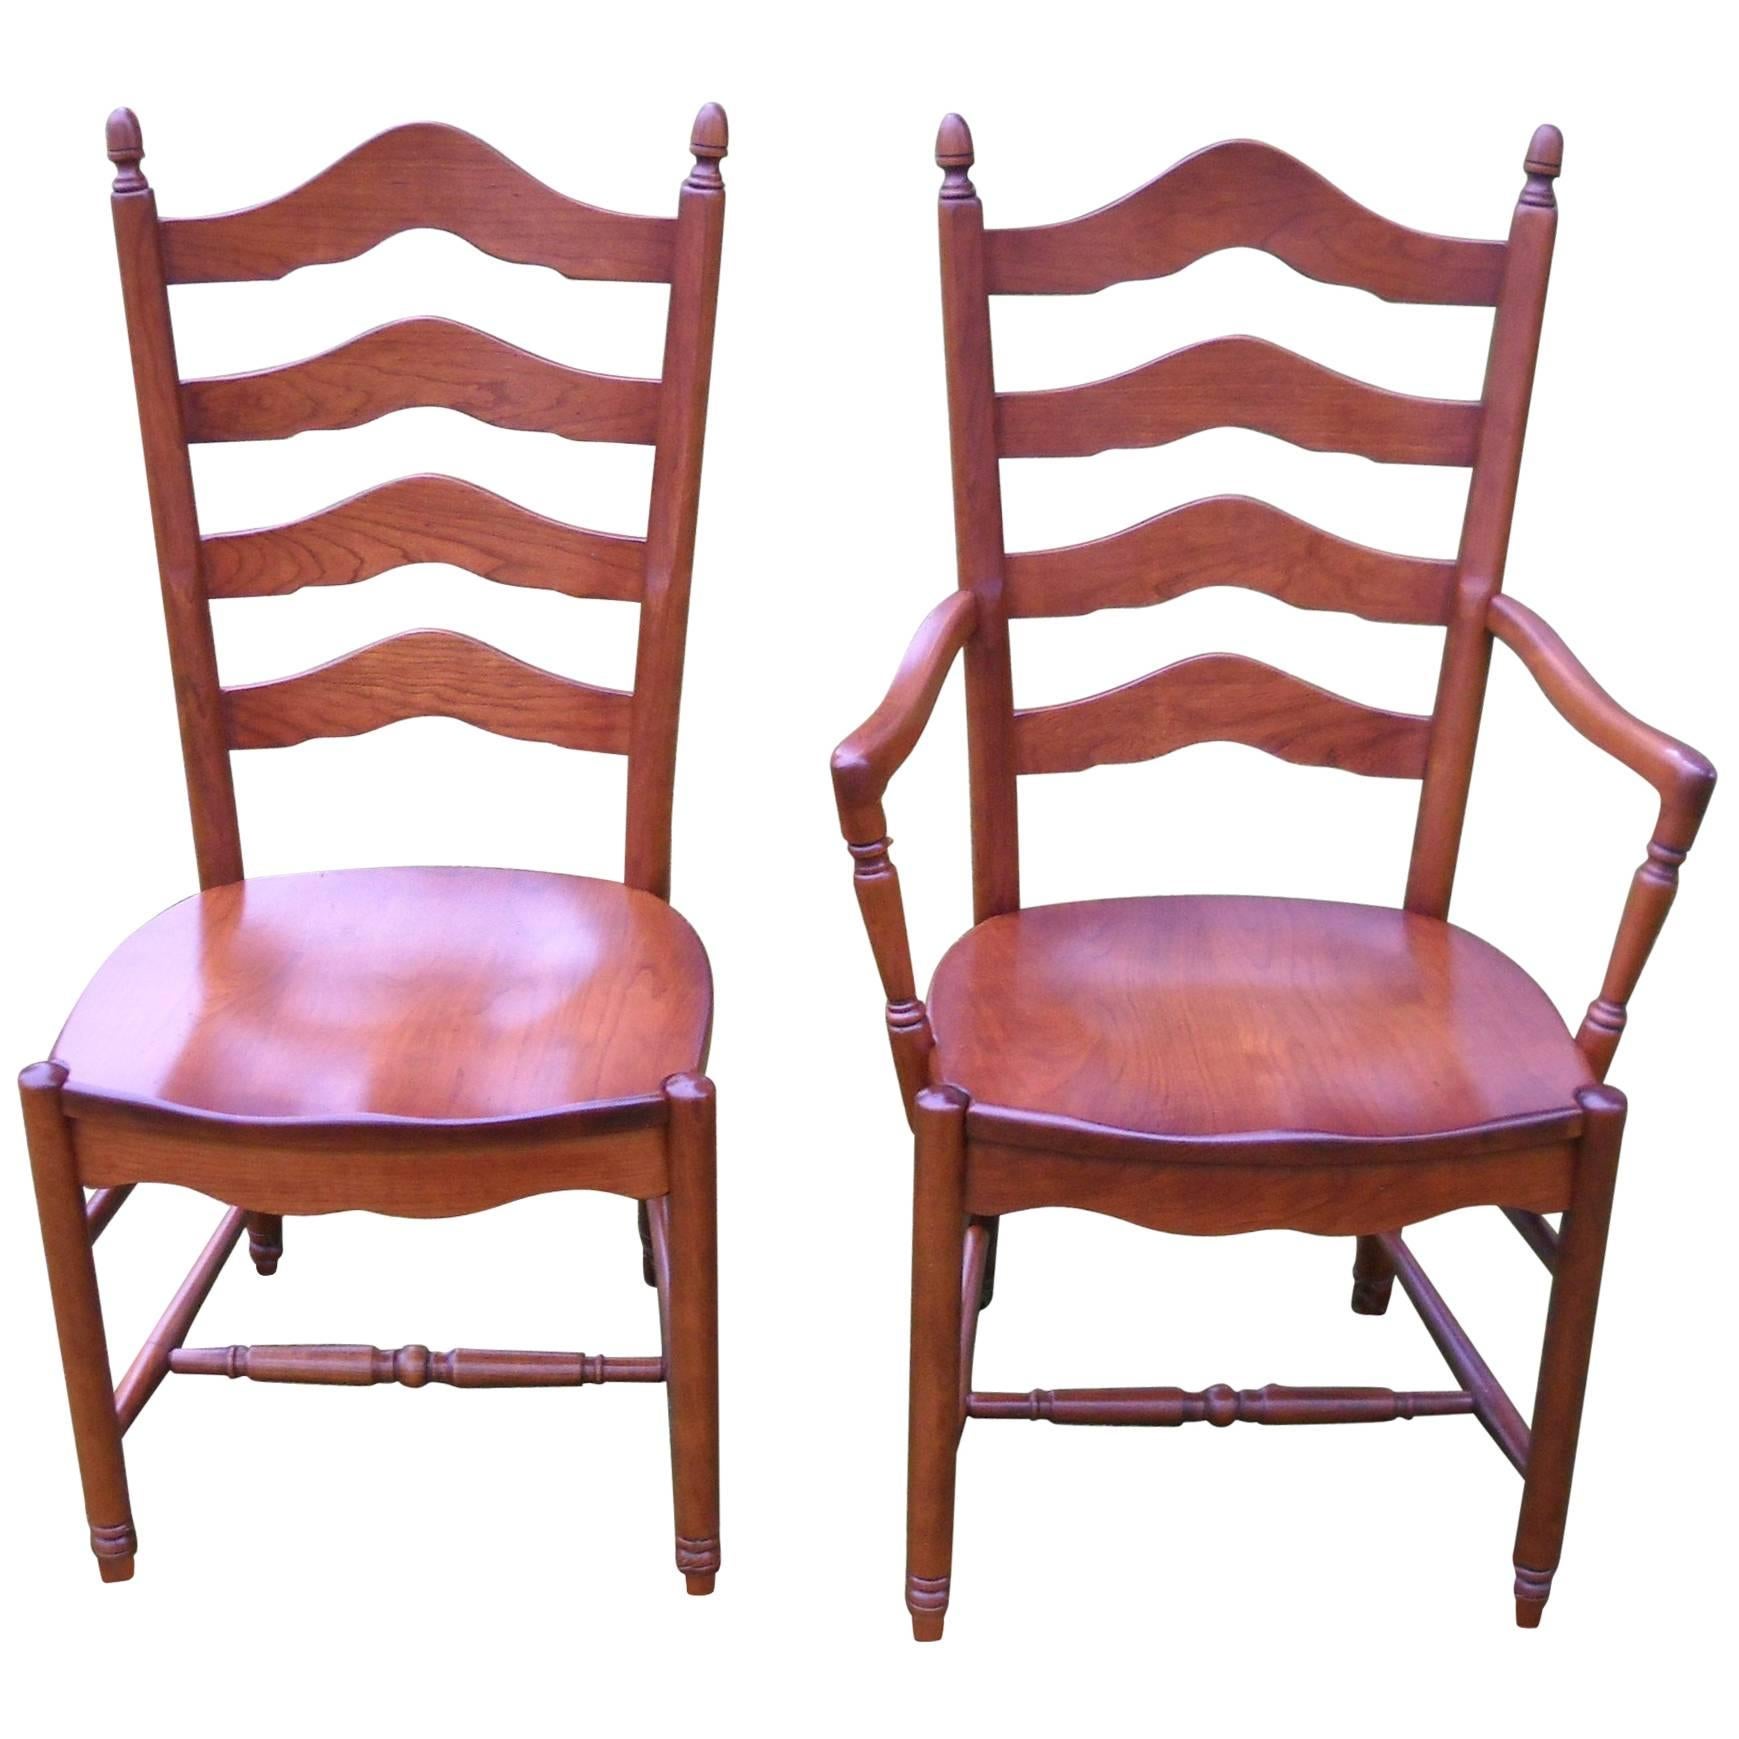 Deluxe Ladder Back Chairs